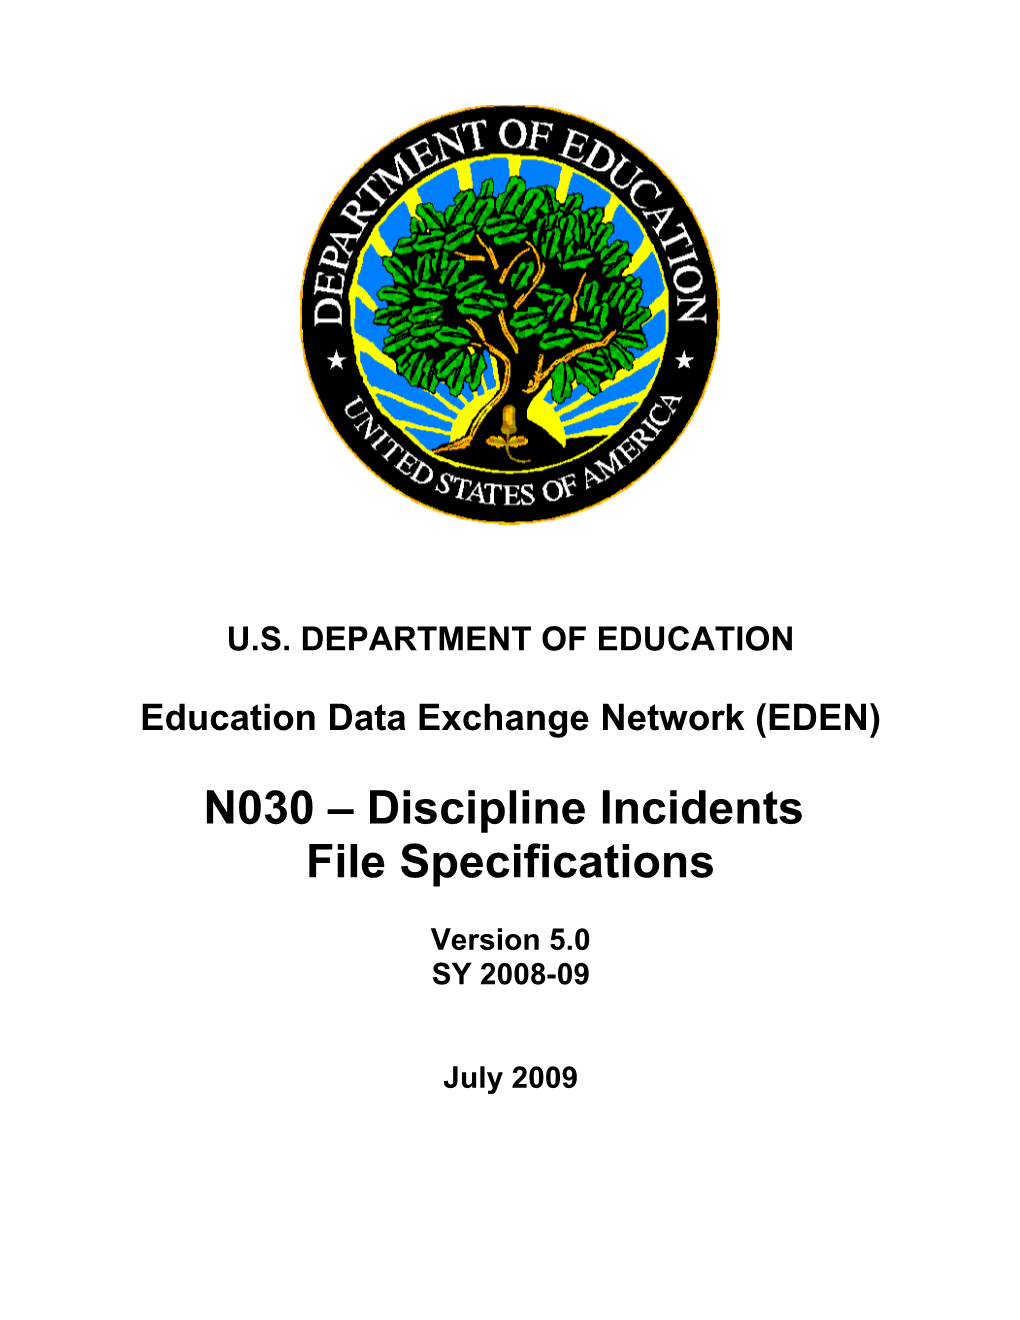 N030 - Discipline Incidents File Specifications (MS Word)